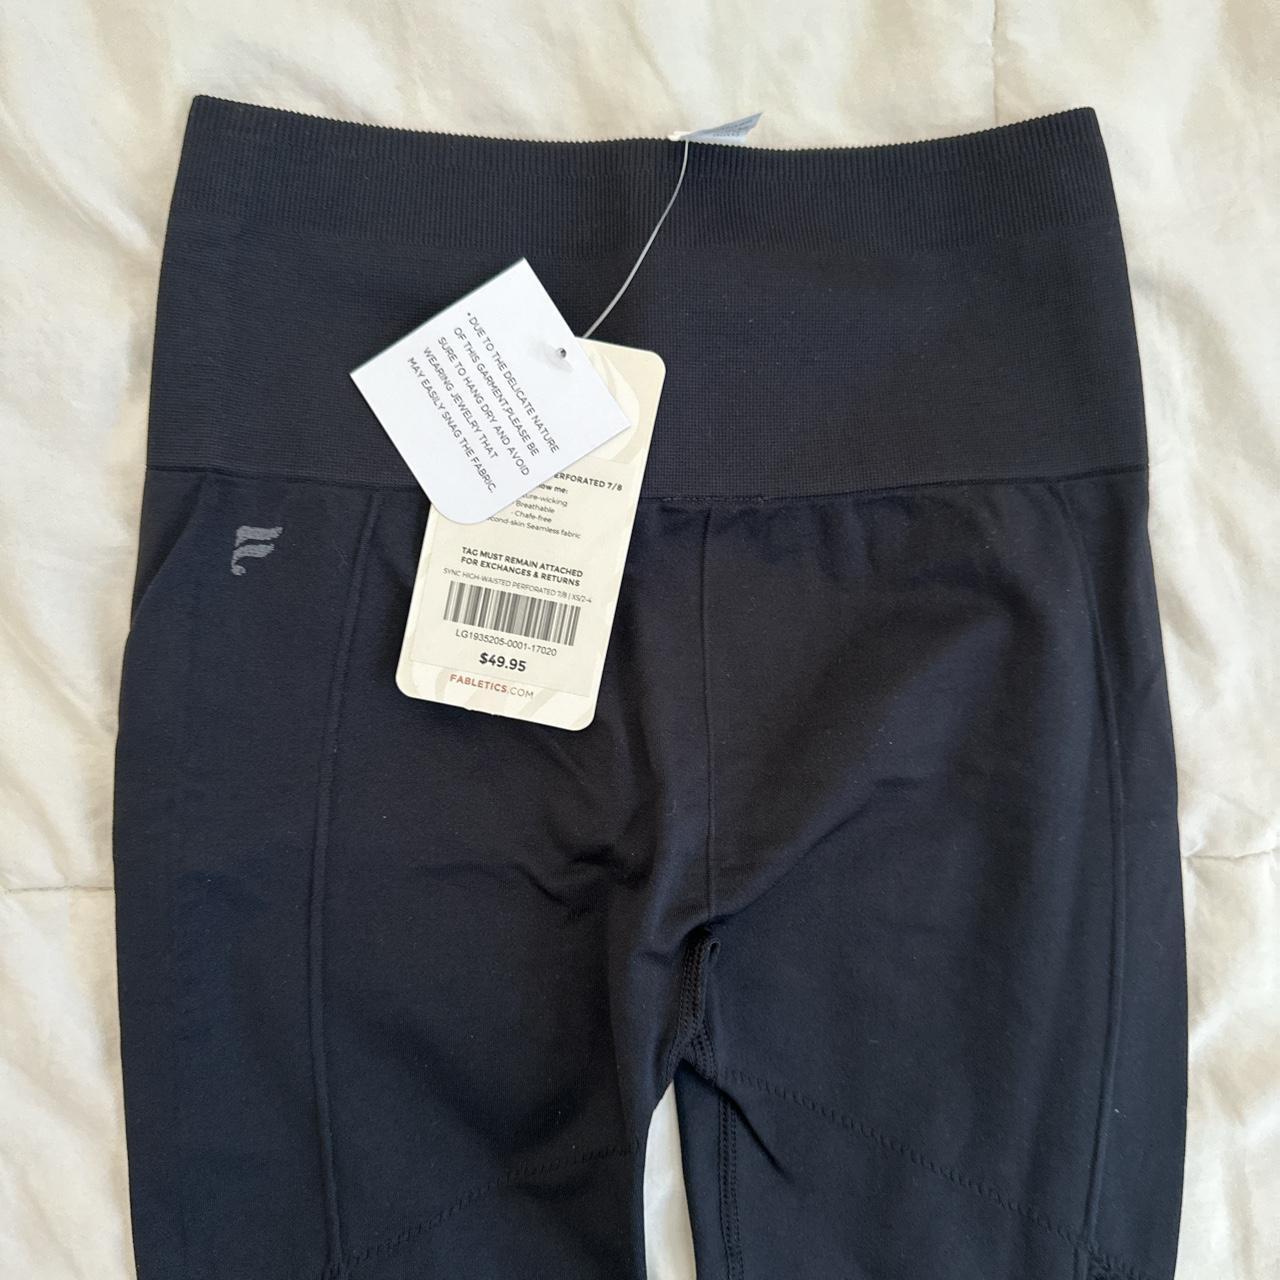 black fabletics leggings size XS brand new with tags - Depop